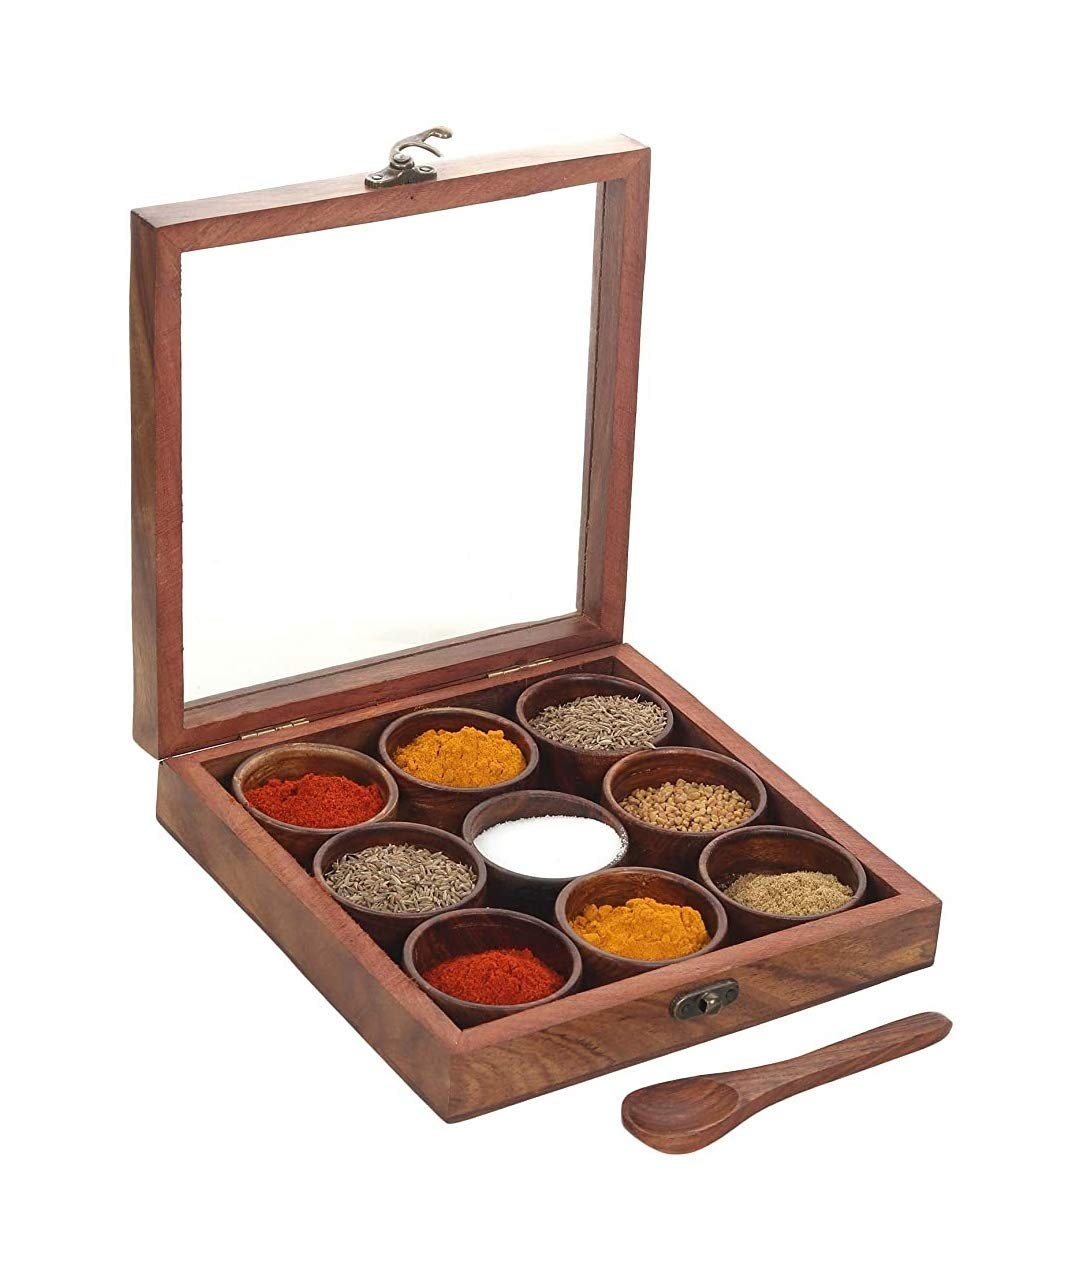 WOODEN SPICE BOX WITH SPOON , MASALA BOX, SPICE RACK ORGANIZER FOR KITCHEN